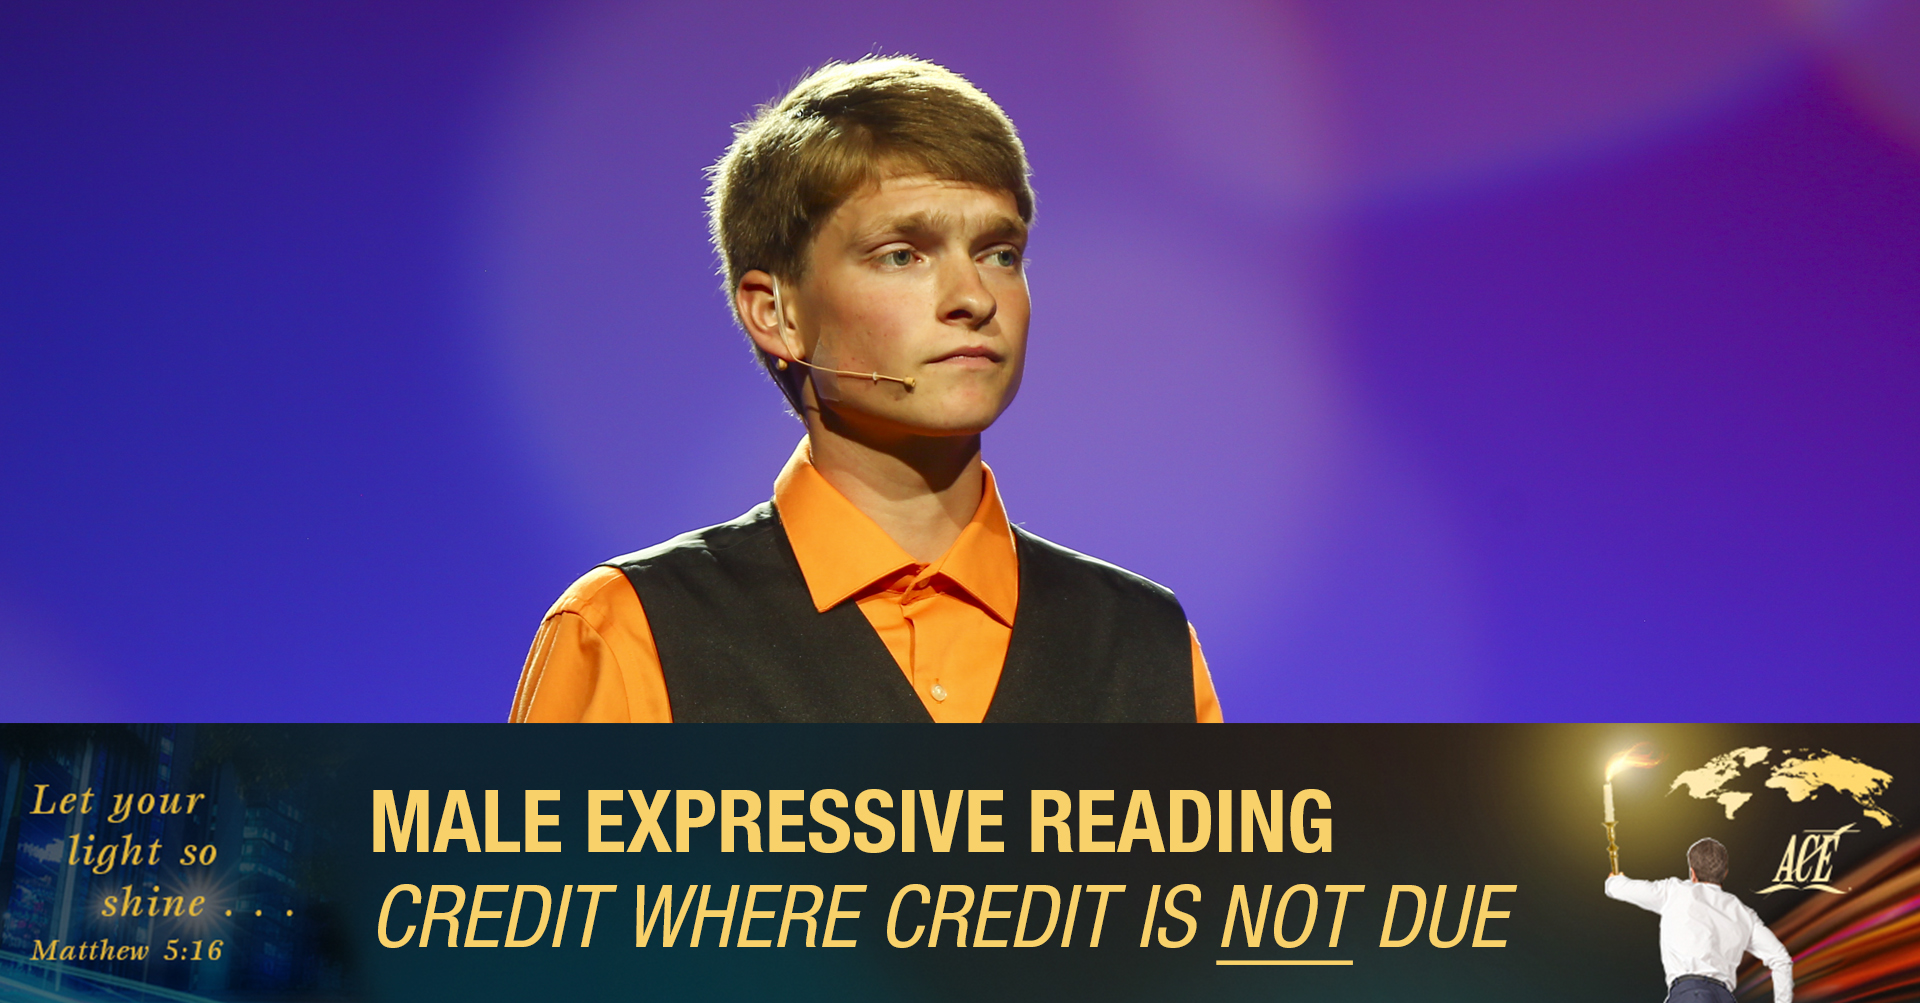 Male Expressive Reading, "Credit Where Credit Is NOT Due" - ISC 2019